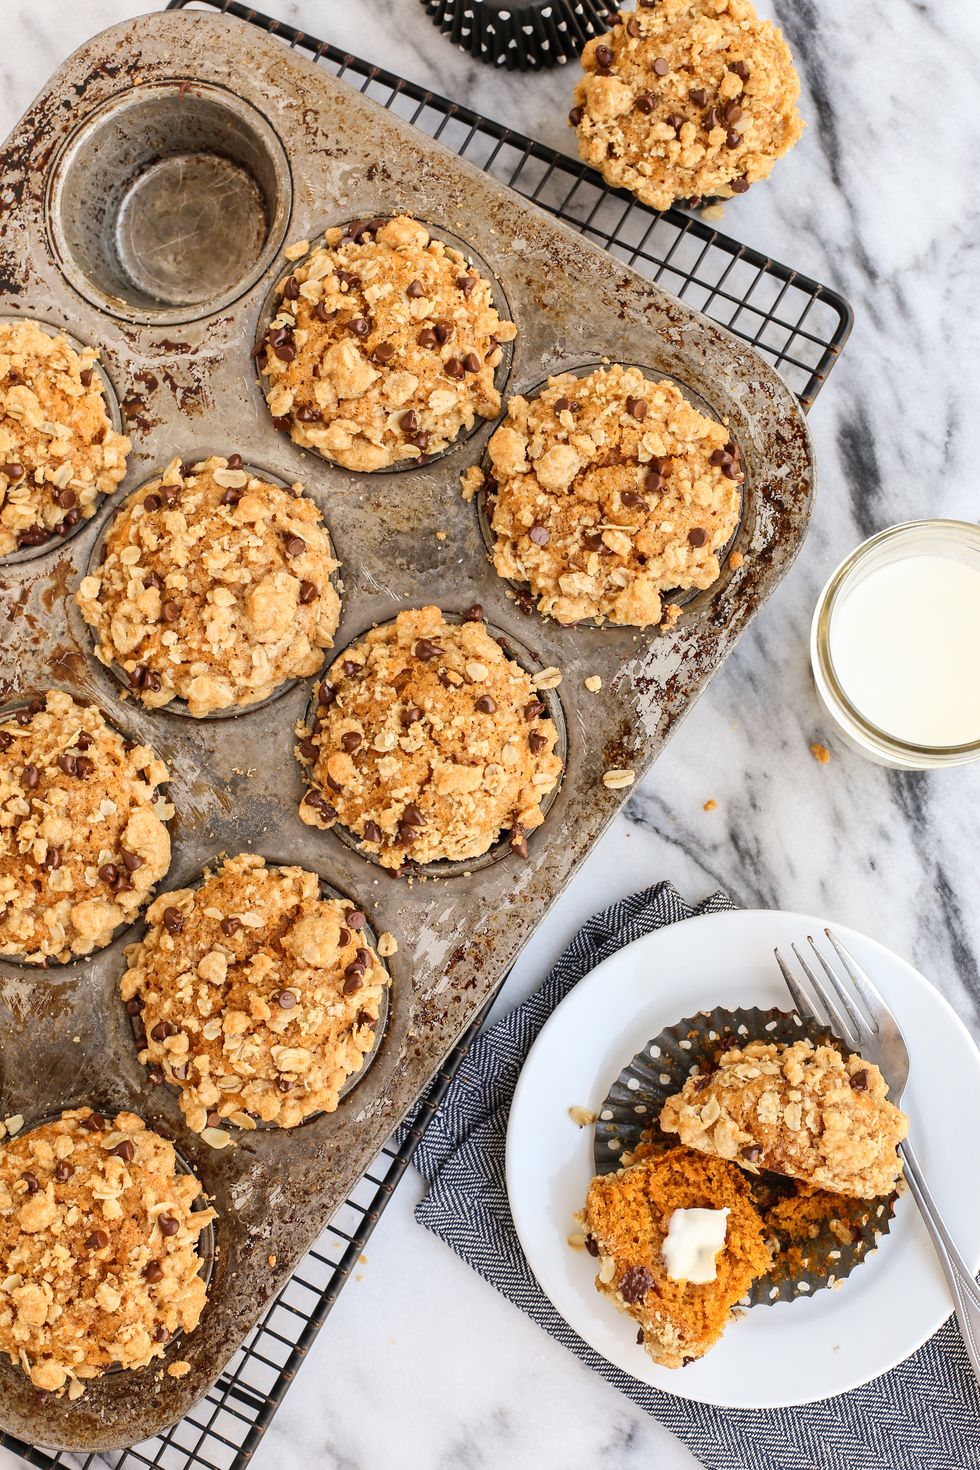 Pumpkin Muffins with Oats and Chocolate Streusel